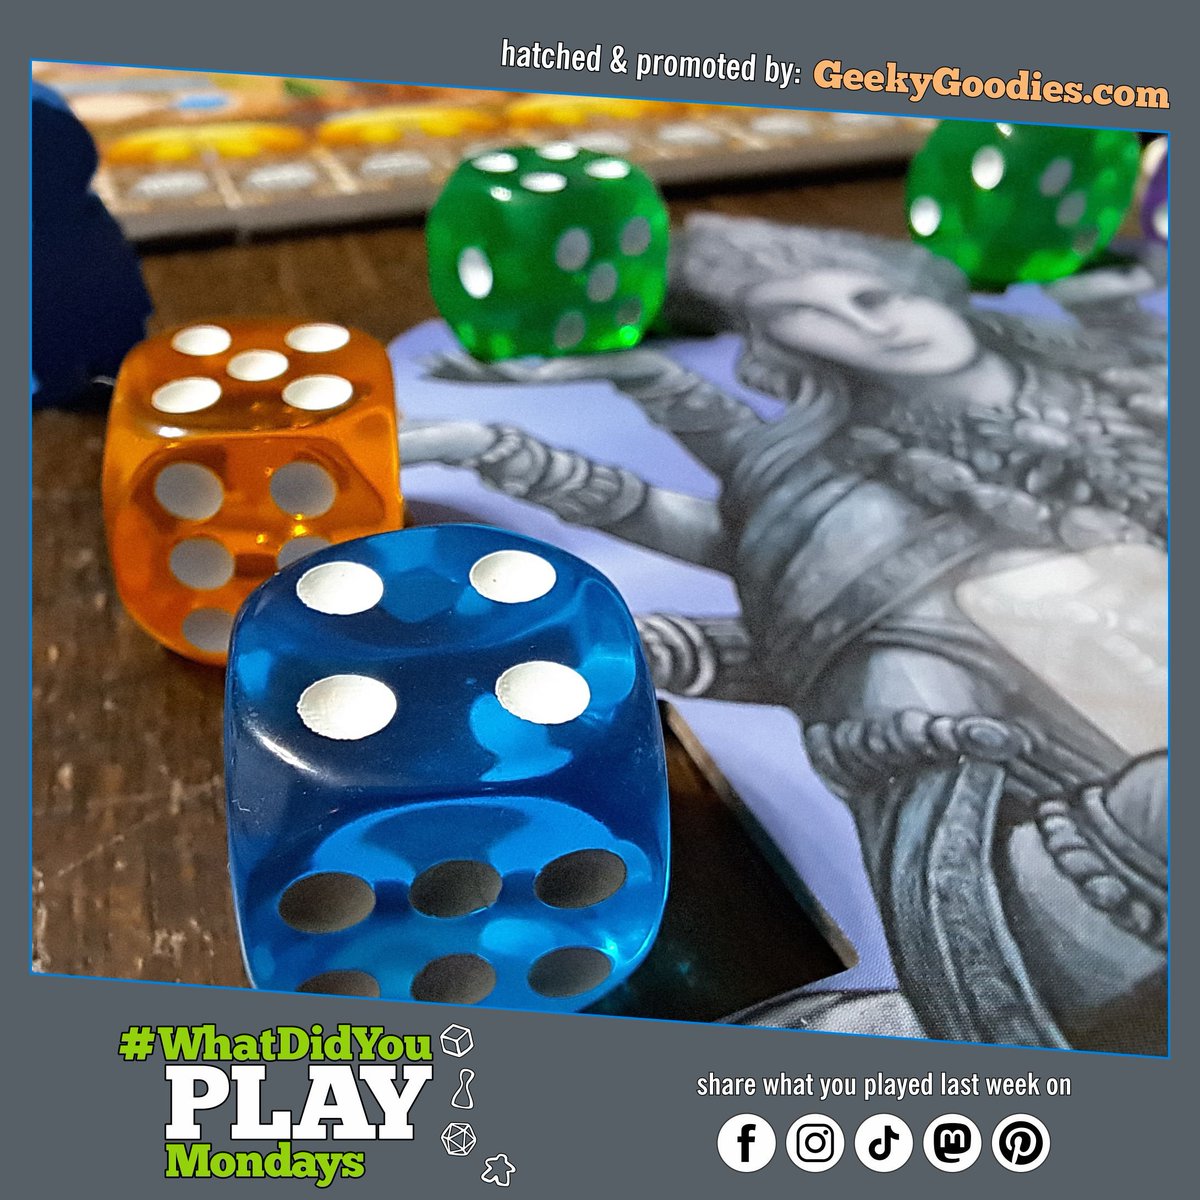 What Board Games did you play this weekend and the previous week? Please share your game plays using #WhatDidYouPlayMondays

Board Game in photo: Rajas of the Ganges

#BoardGames #GameNight #games #gaming #gamers #PlayMoreGames #TabletopGames #GeekyGoodies